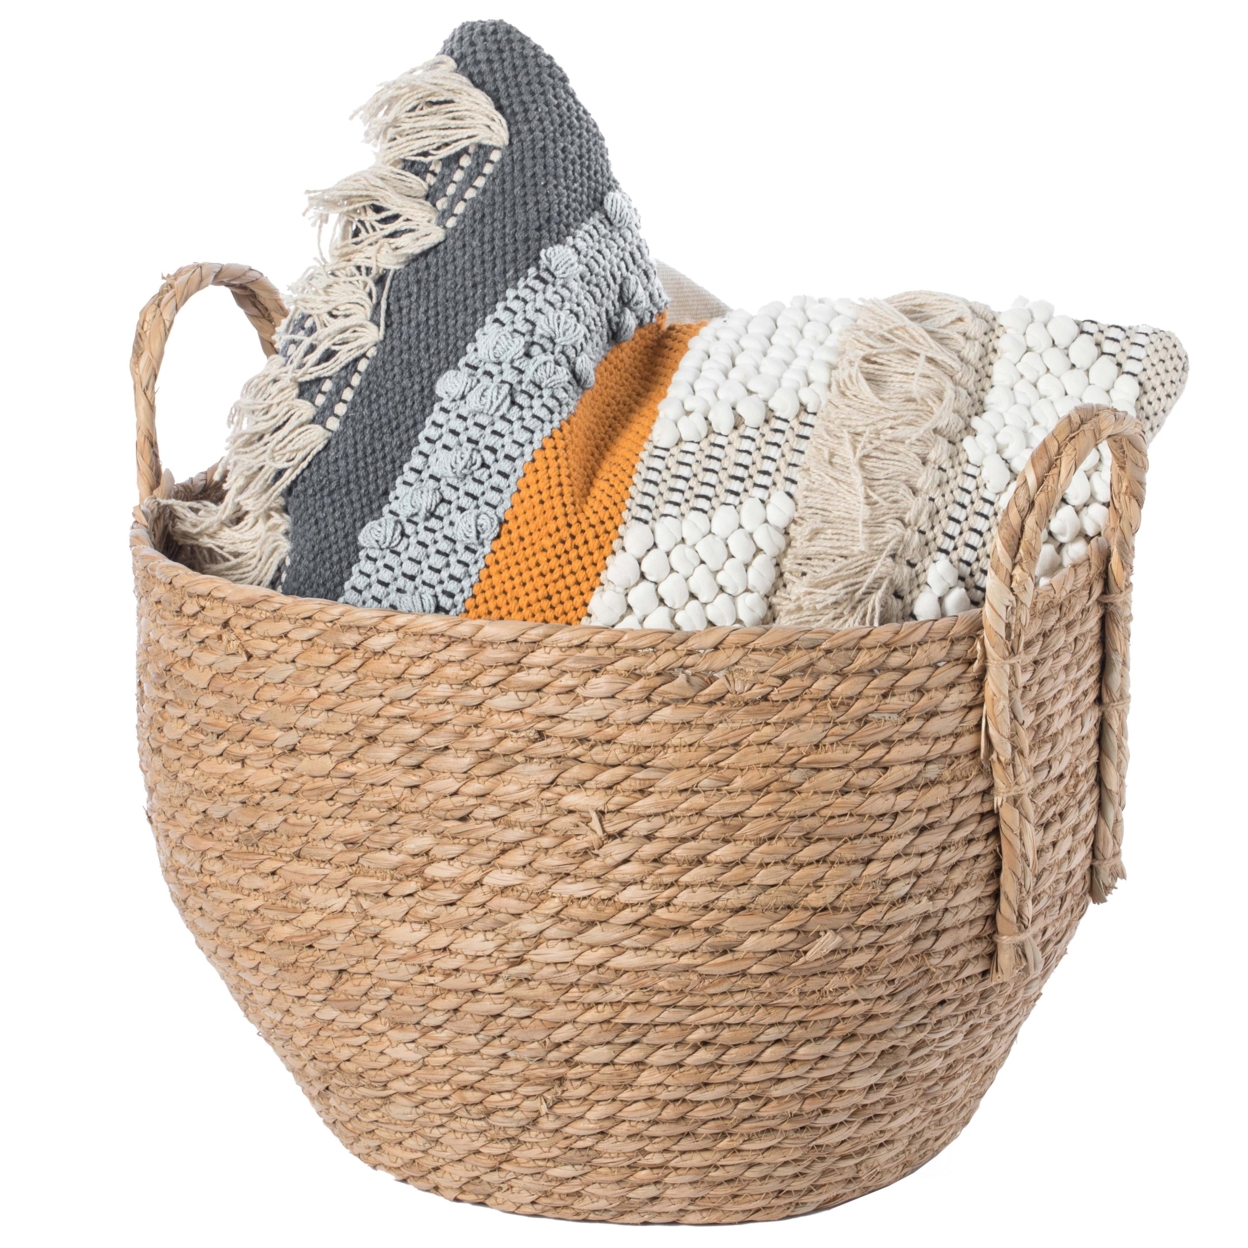 Decorative Round Wicker Woven Rope Storage Blanket Basket With Braided Handles - Large